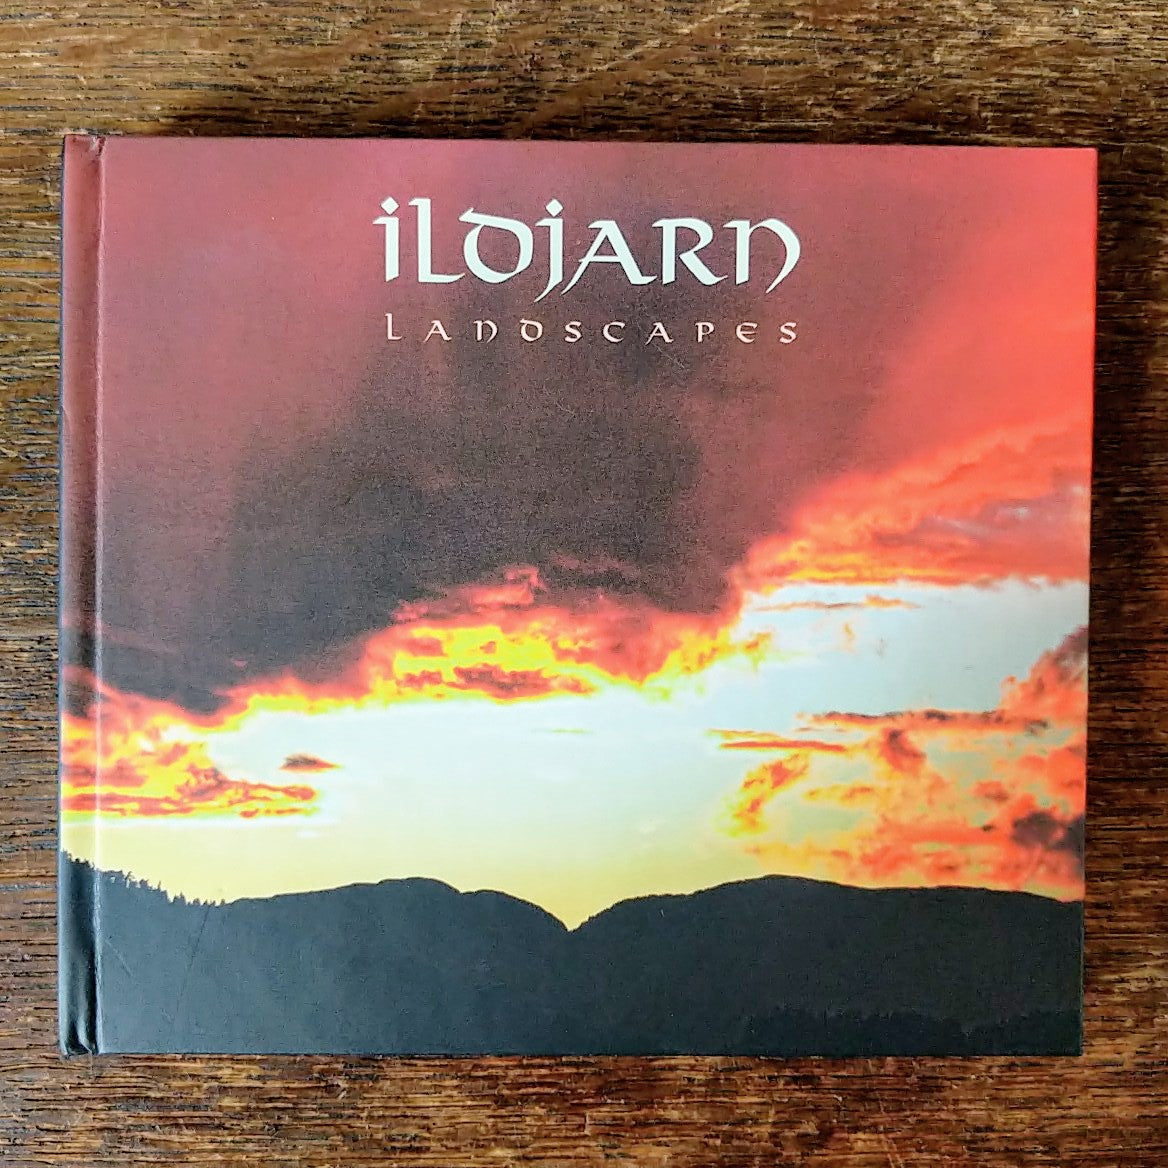 [SOLD OUT] ILDJARN "Landscapes" Double CD [2xCD hardcover digibook]